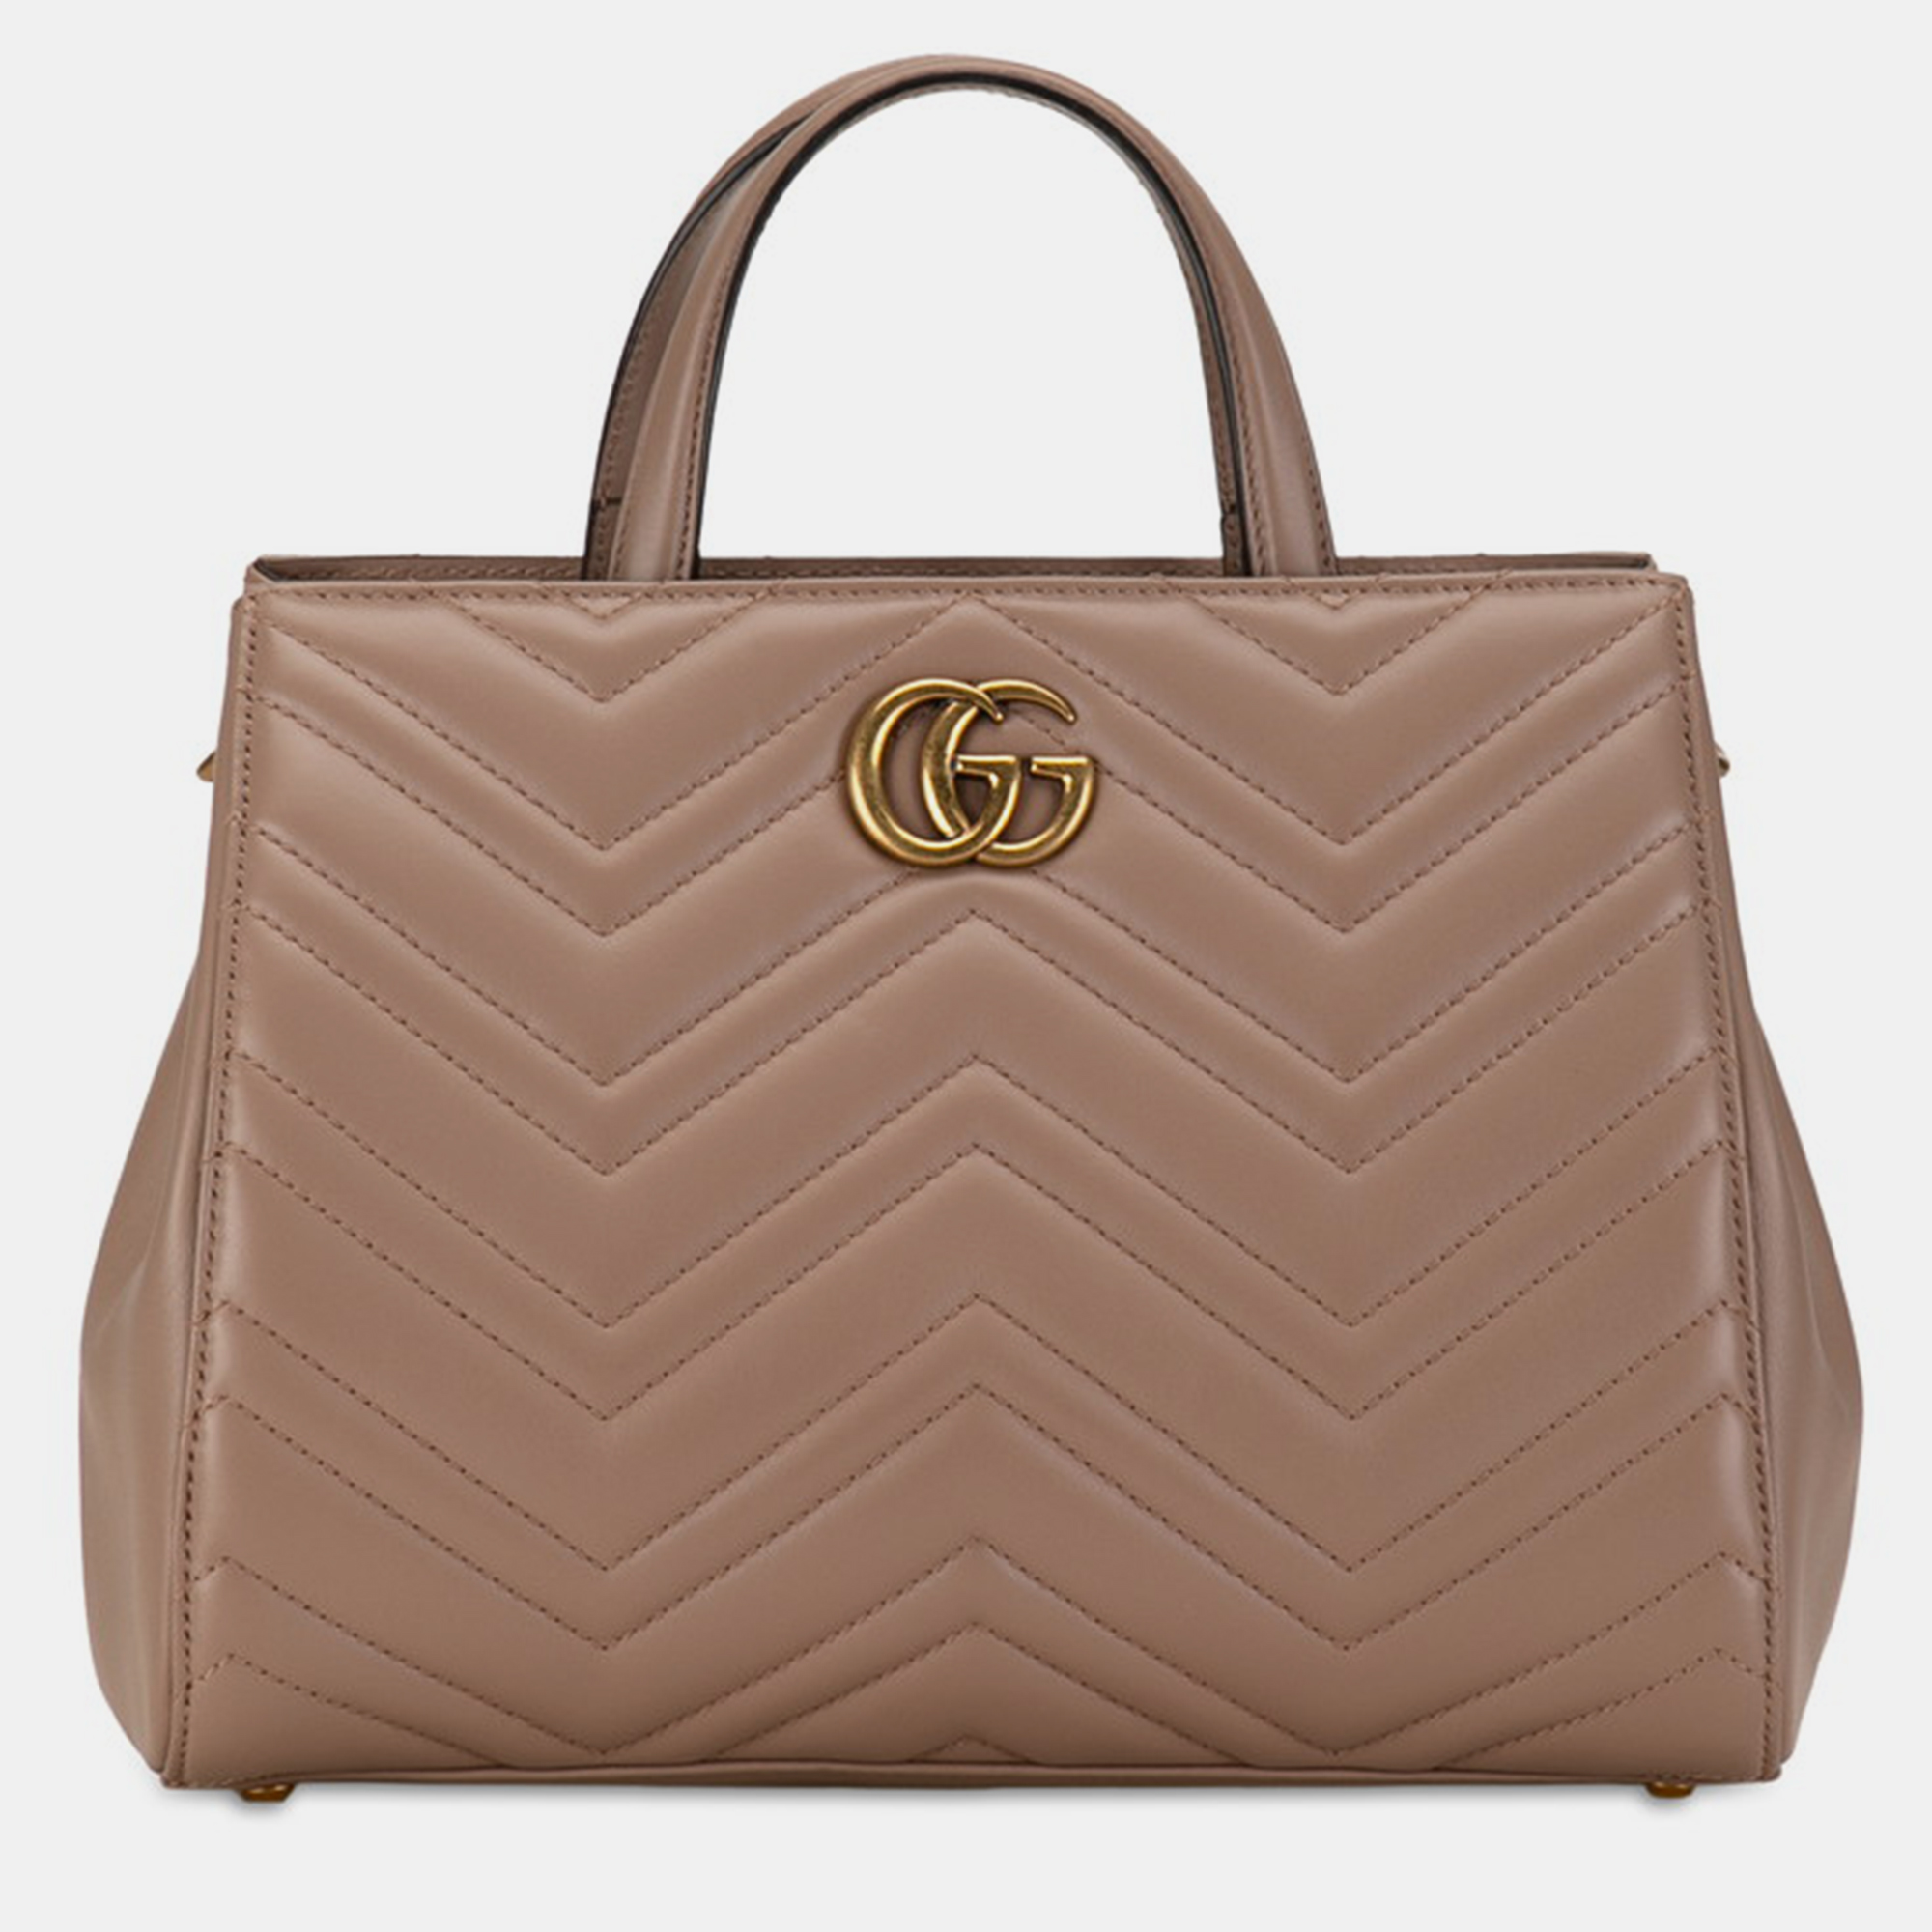 Gucci beige leather  gg marmont top handle bags